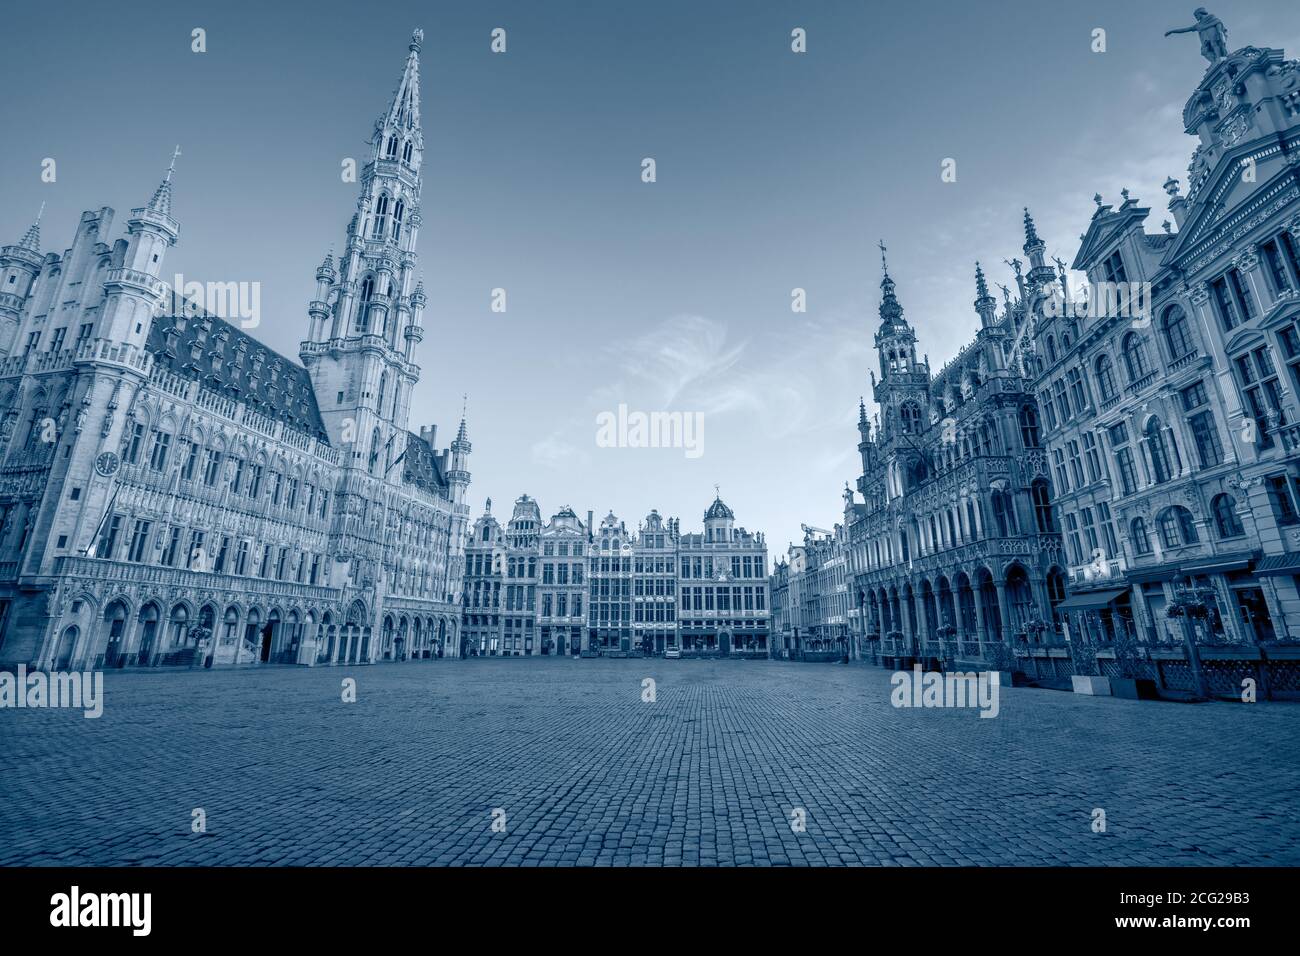 Brussels, Belgium. Toned cityscape image of Brussels with Grand Place at sunrise. Stock Photo